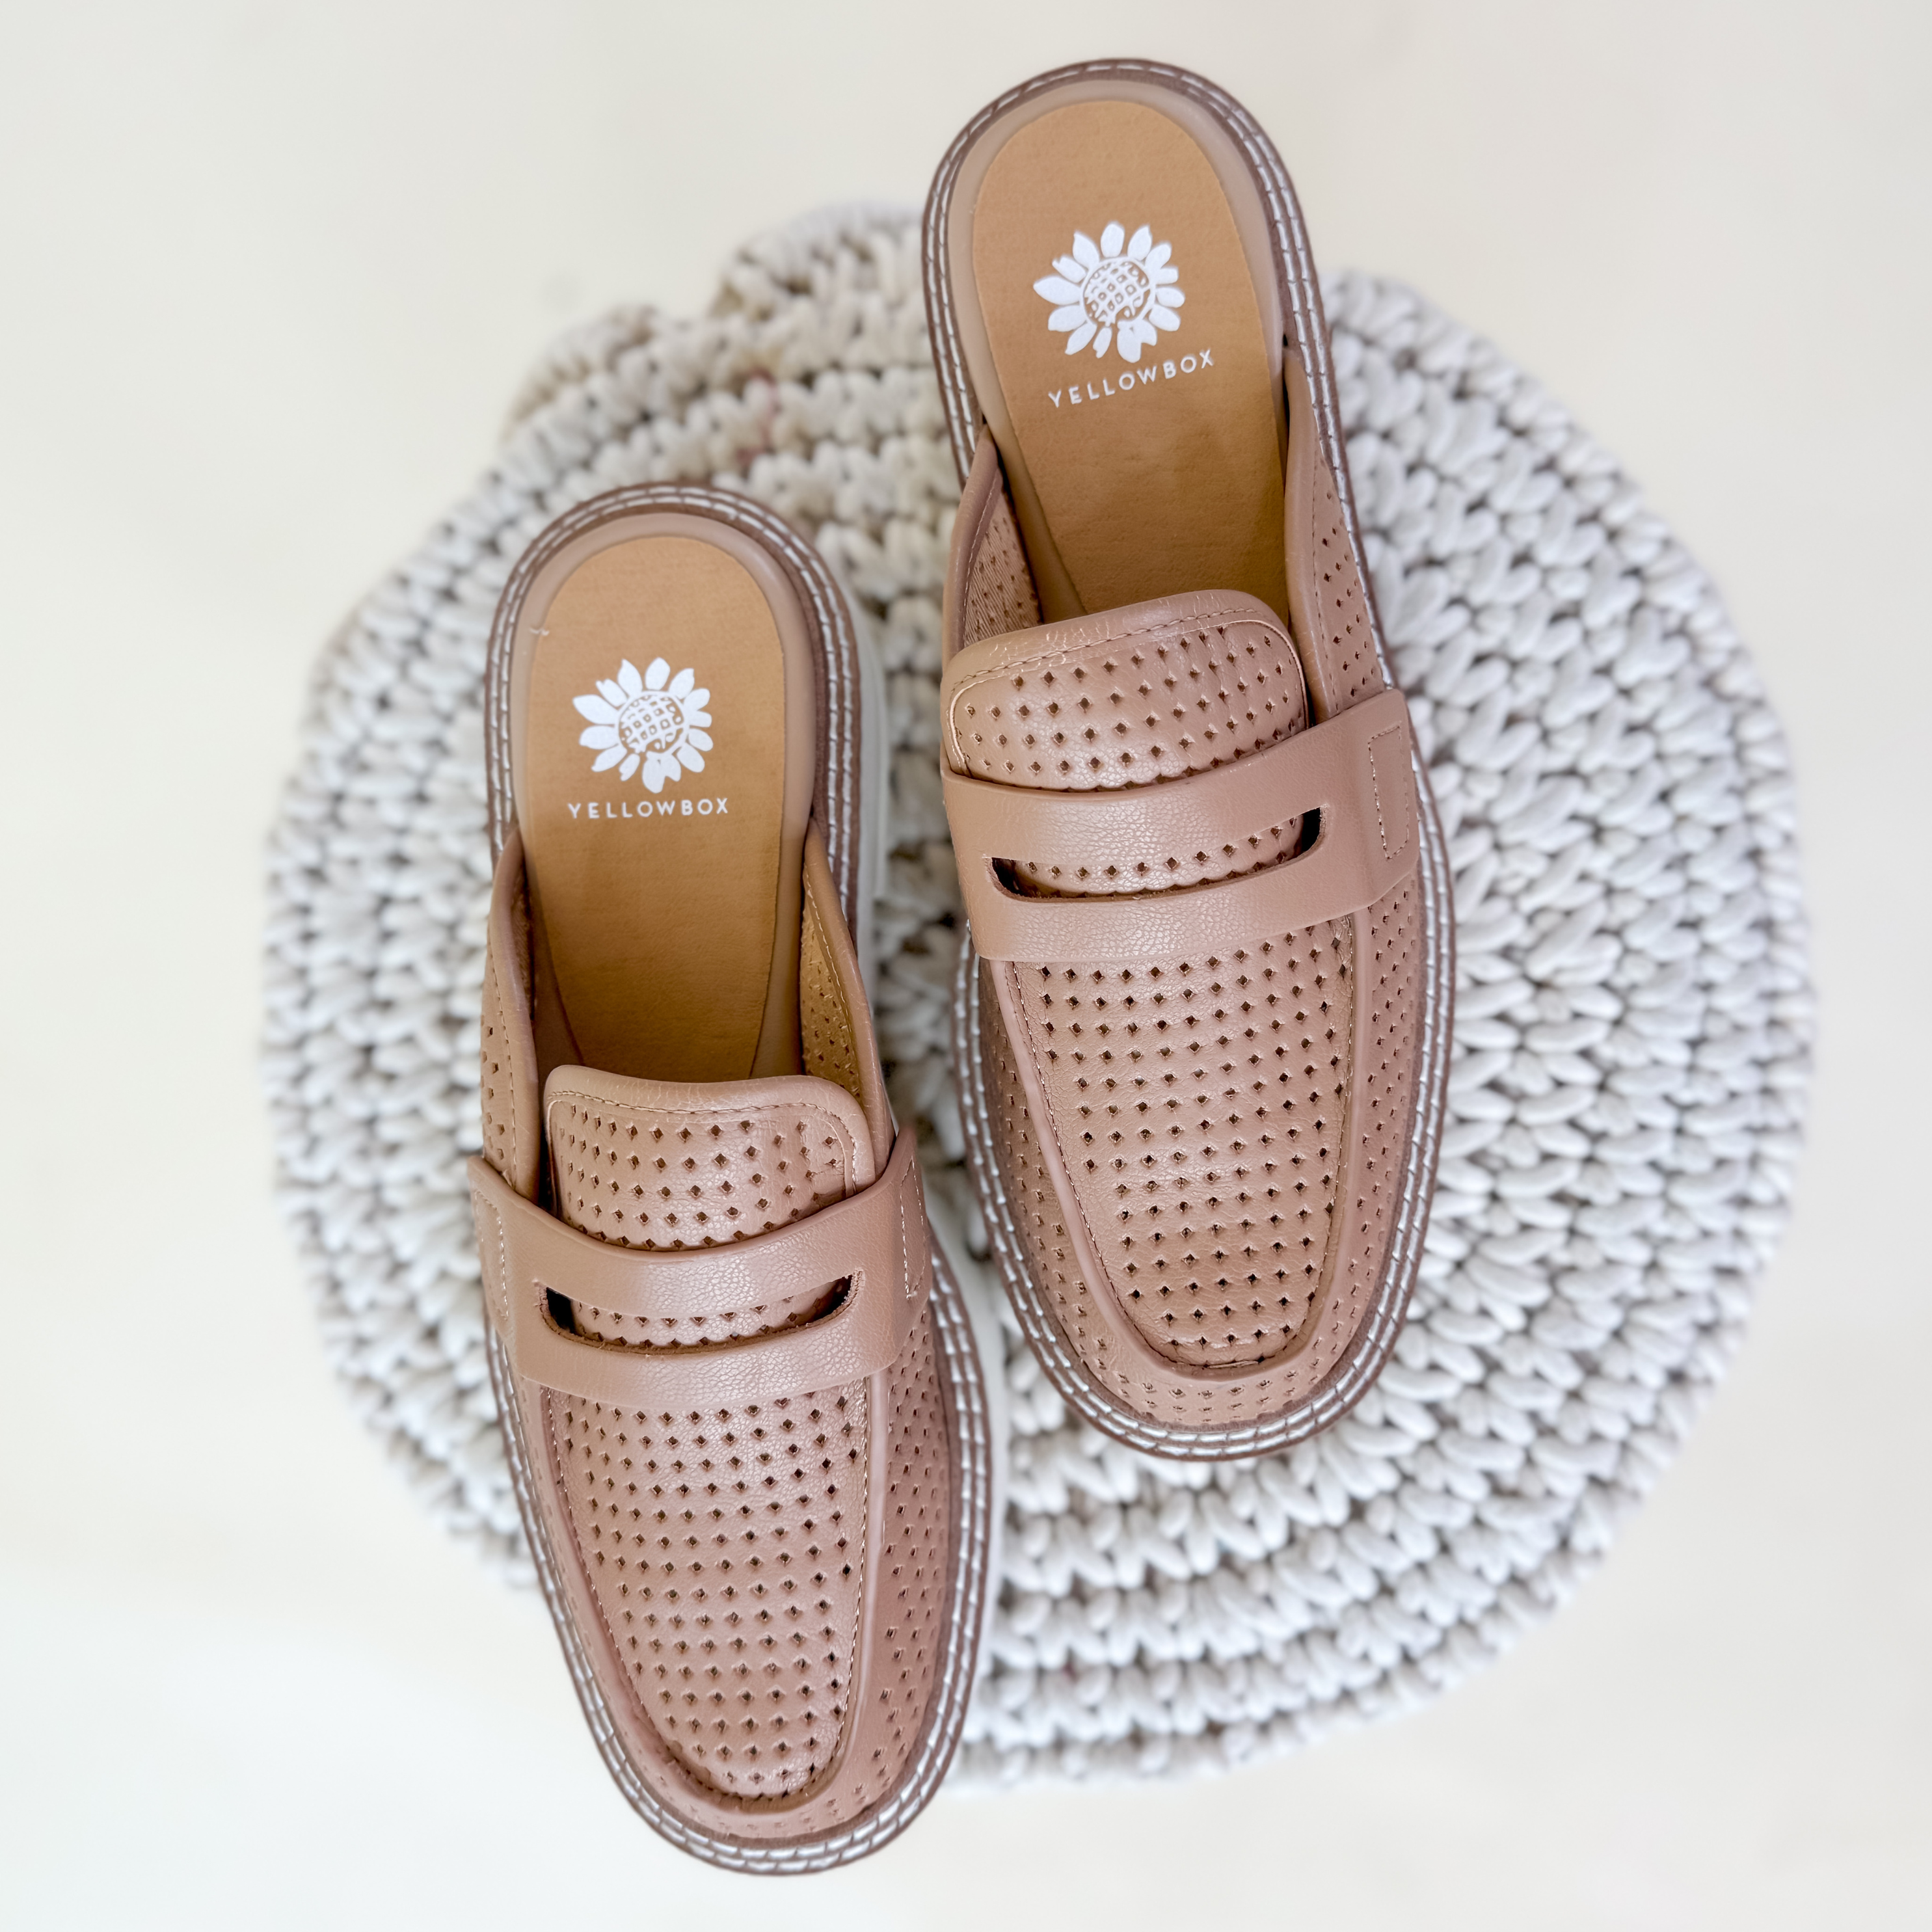 Yellowbox | Sherlyn Loafer Mule in Almond - Giddy Up Glamour Boutique